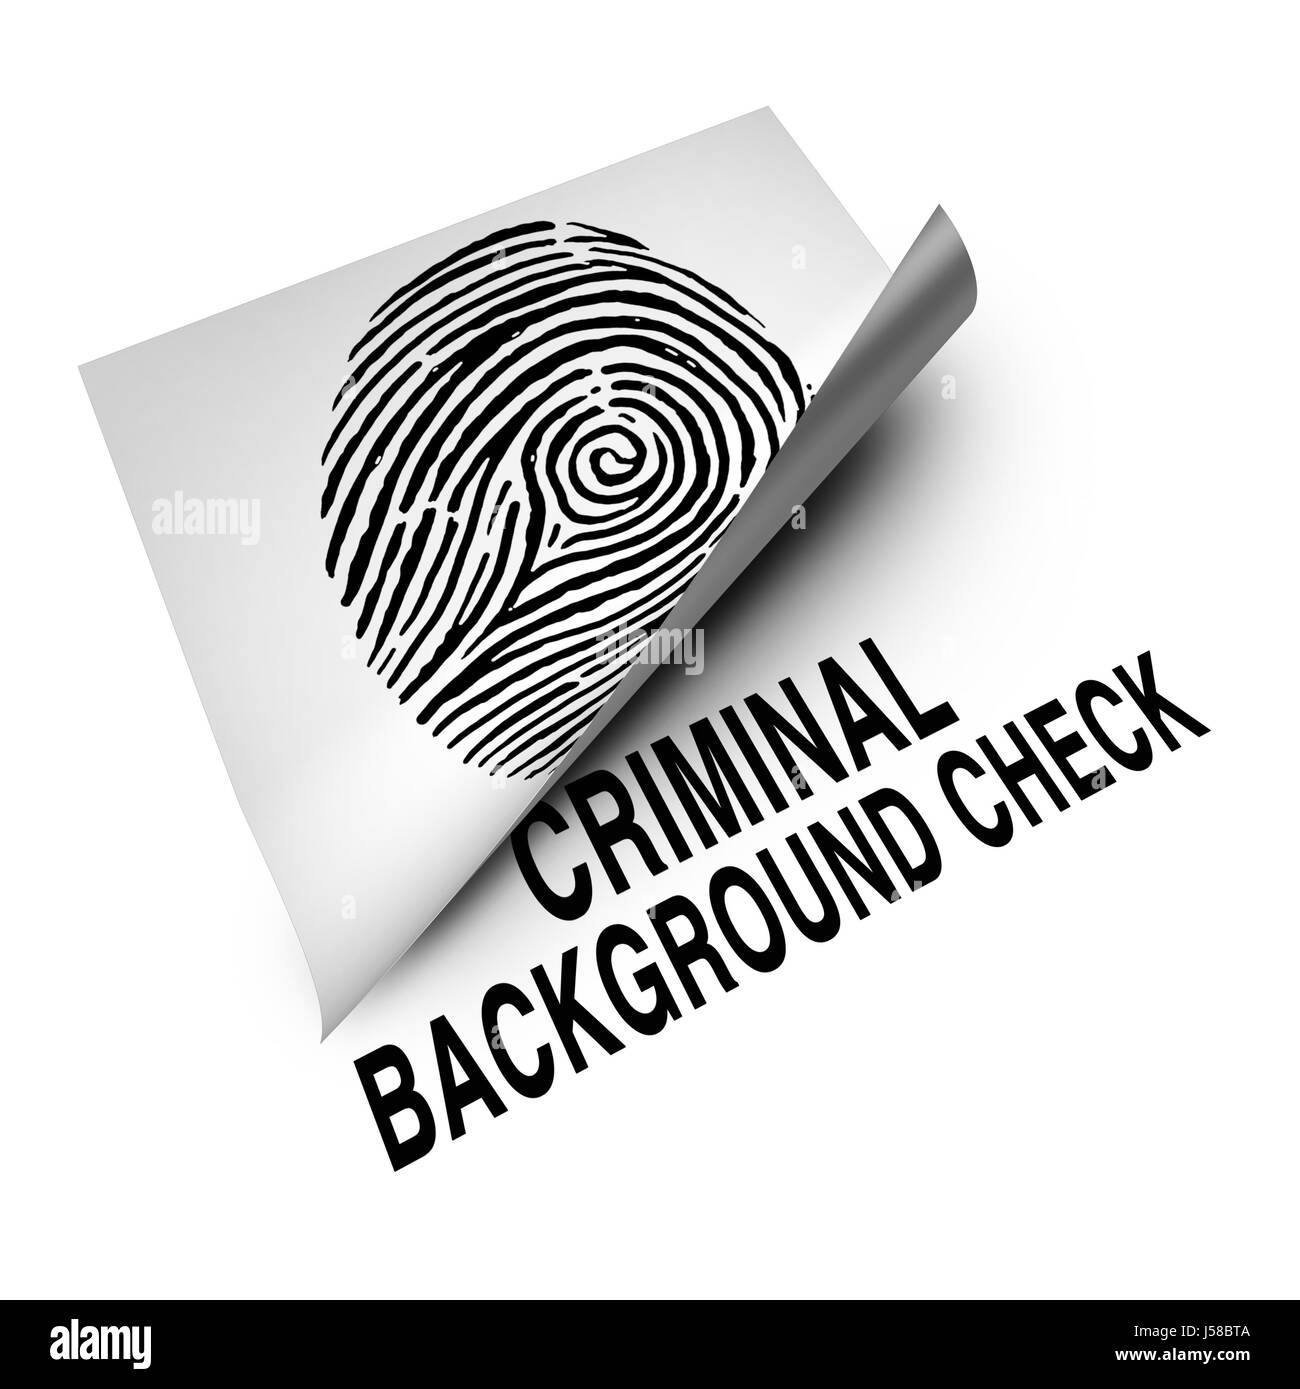 Criminal background check concept and employment screening of potential candidates to verify with a police analysis. Stock Photo